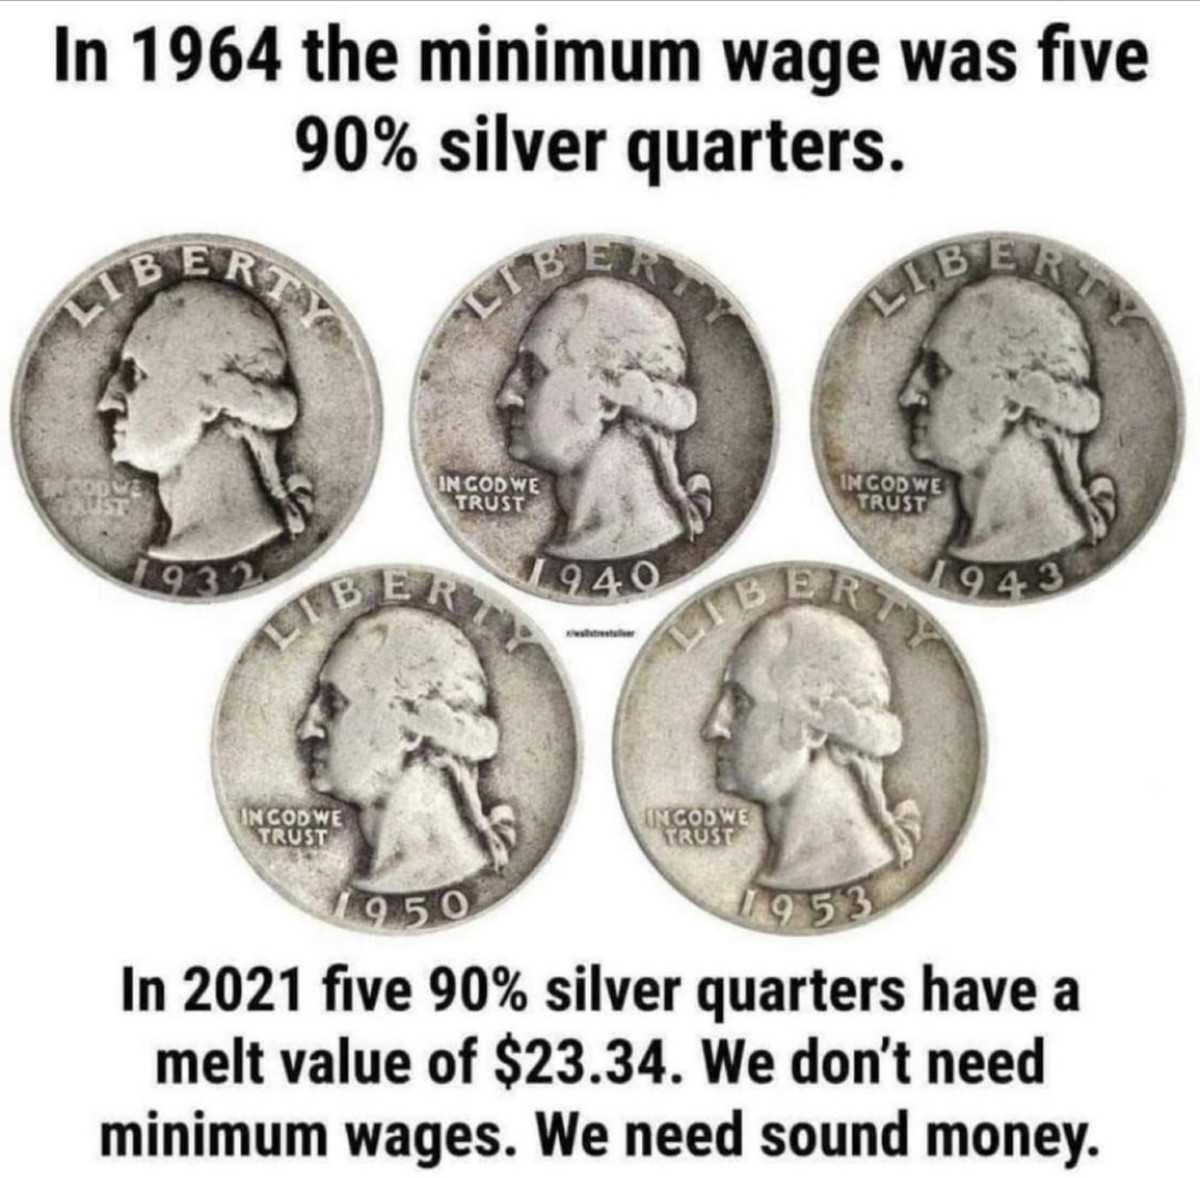 grotesque Cat. .. Every time this gets posted it needs to be pointed out &gt;Minimum wage used to be based on reliable currency &gt;Currency no longer reliable &gt;Therefore we d